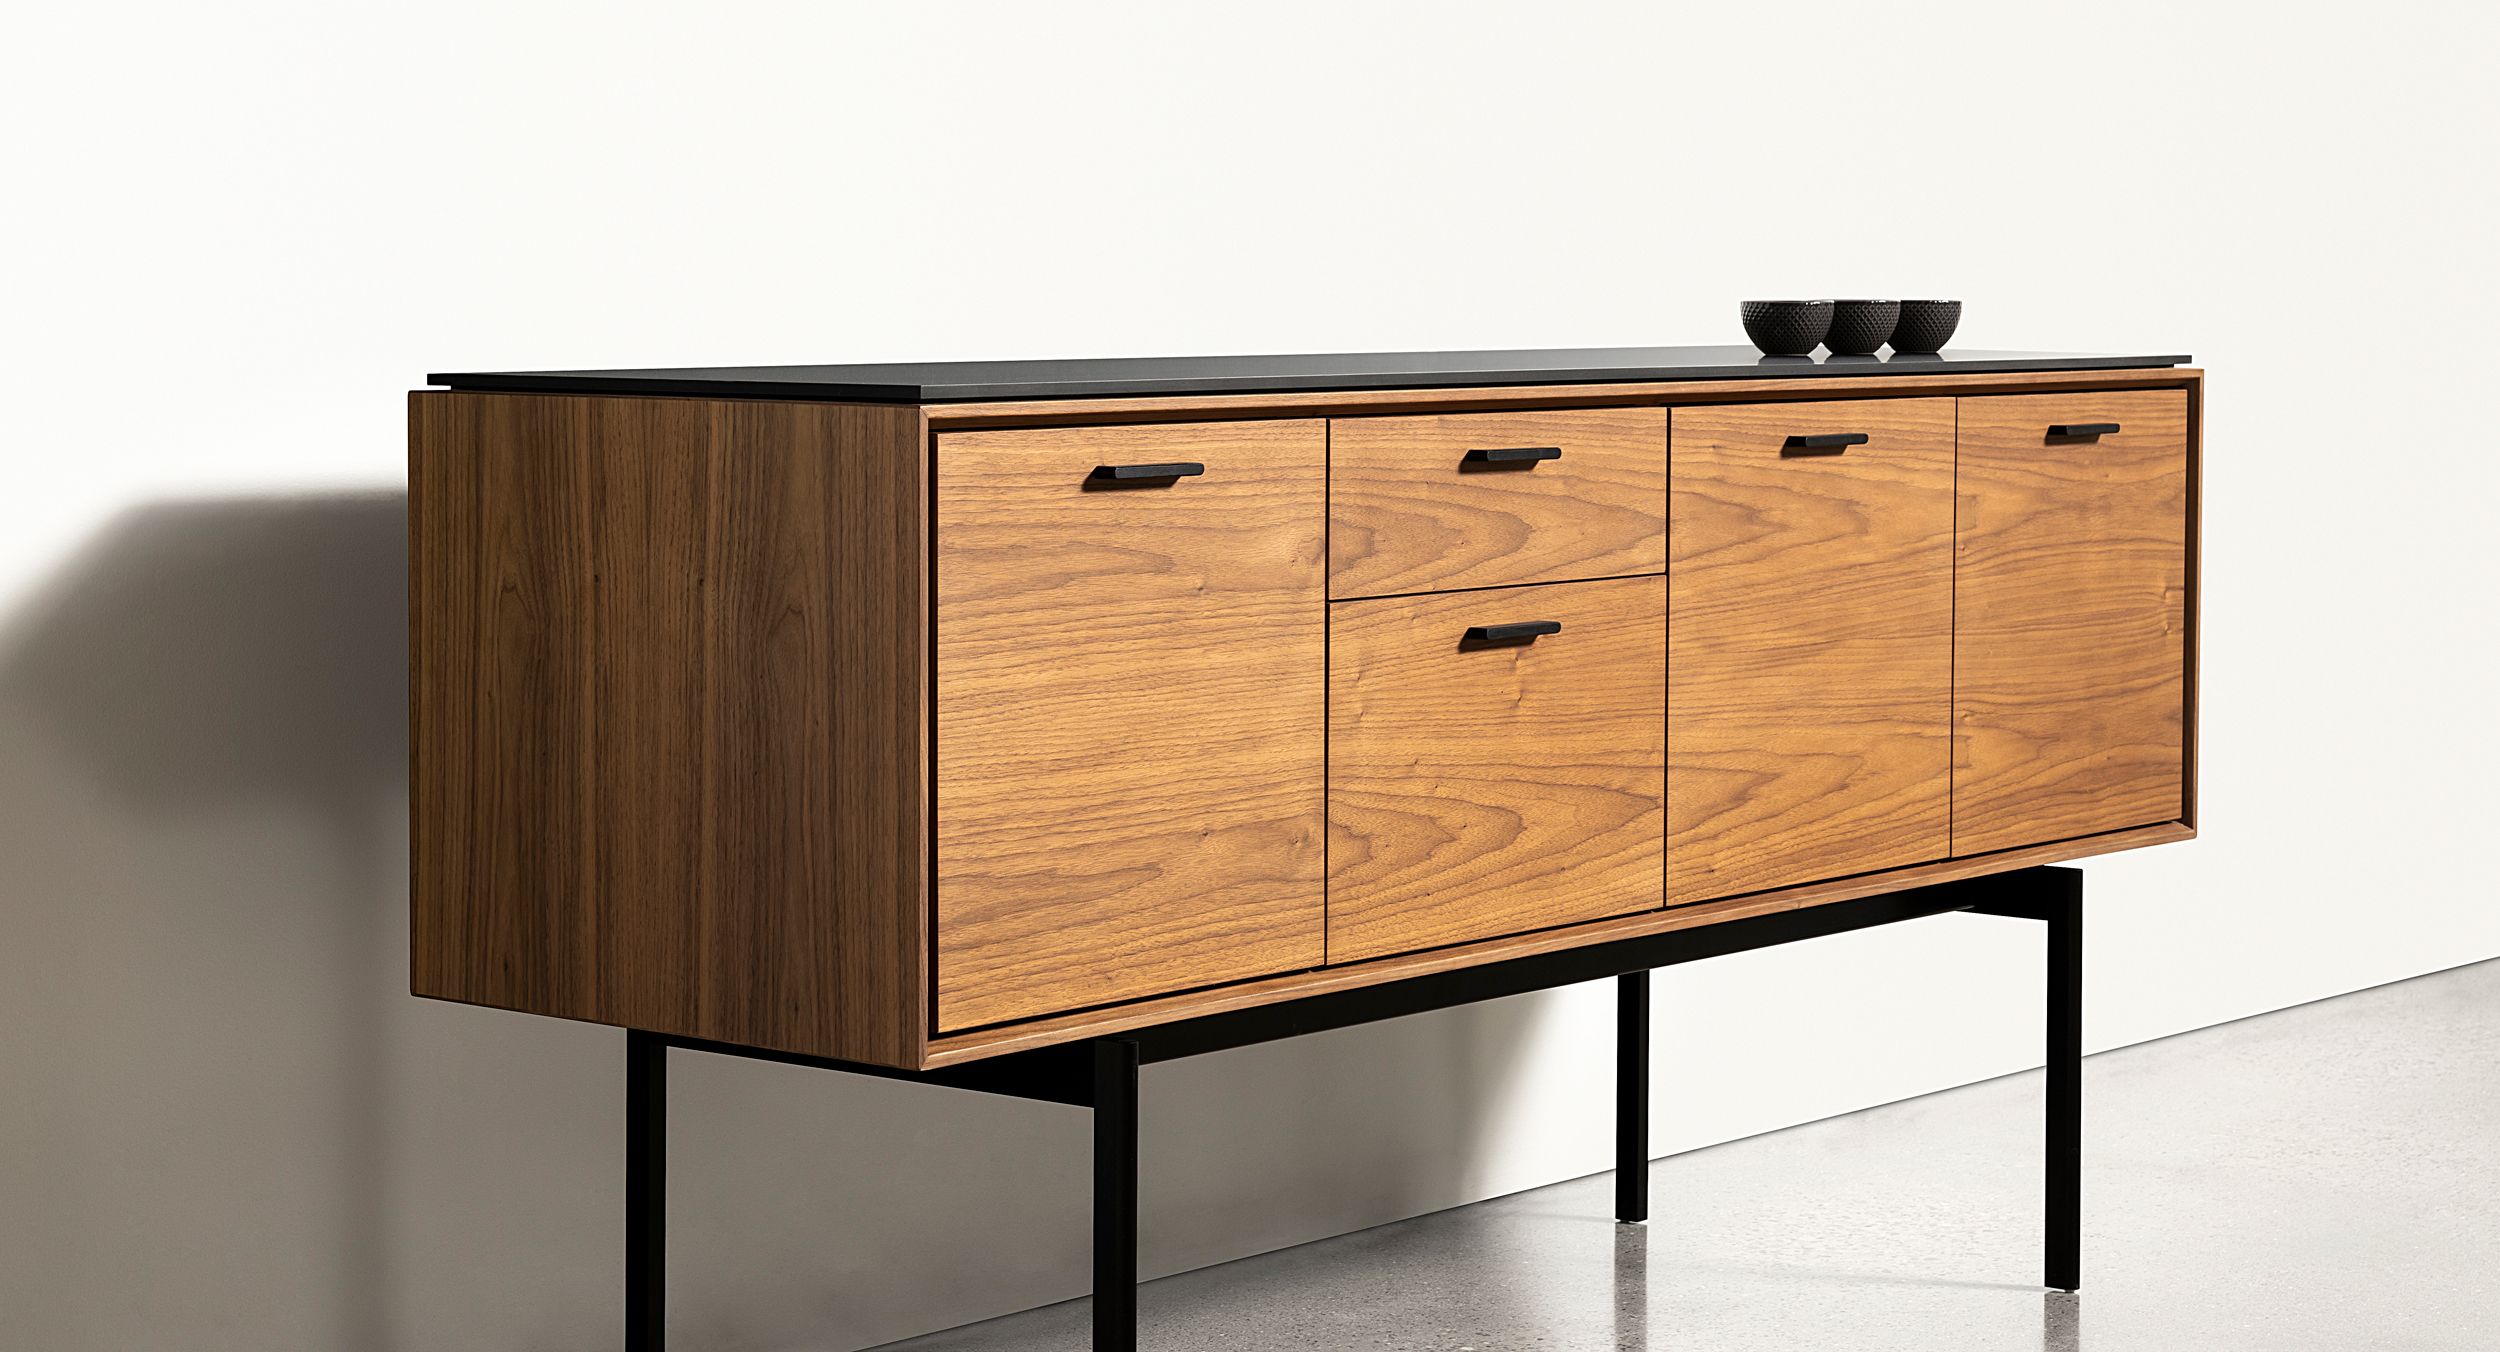 HALO Credenzas are designed to elevate spaces with clean modern lines and exceptional functionality.